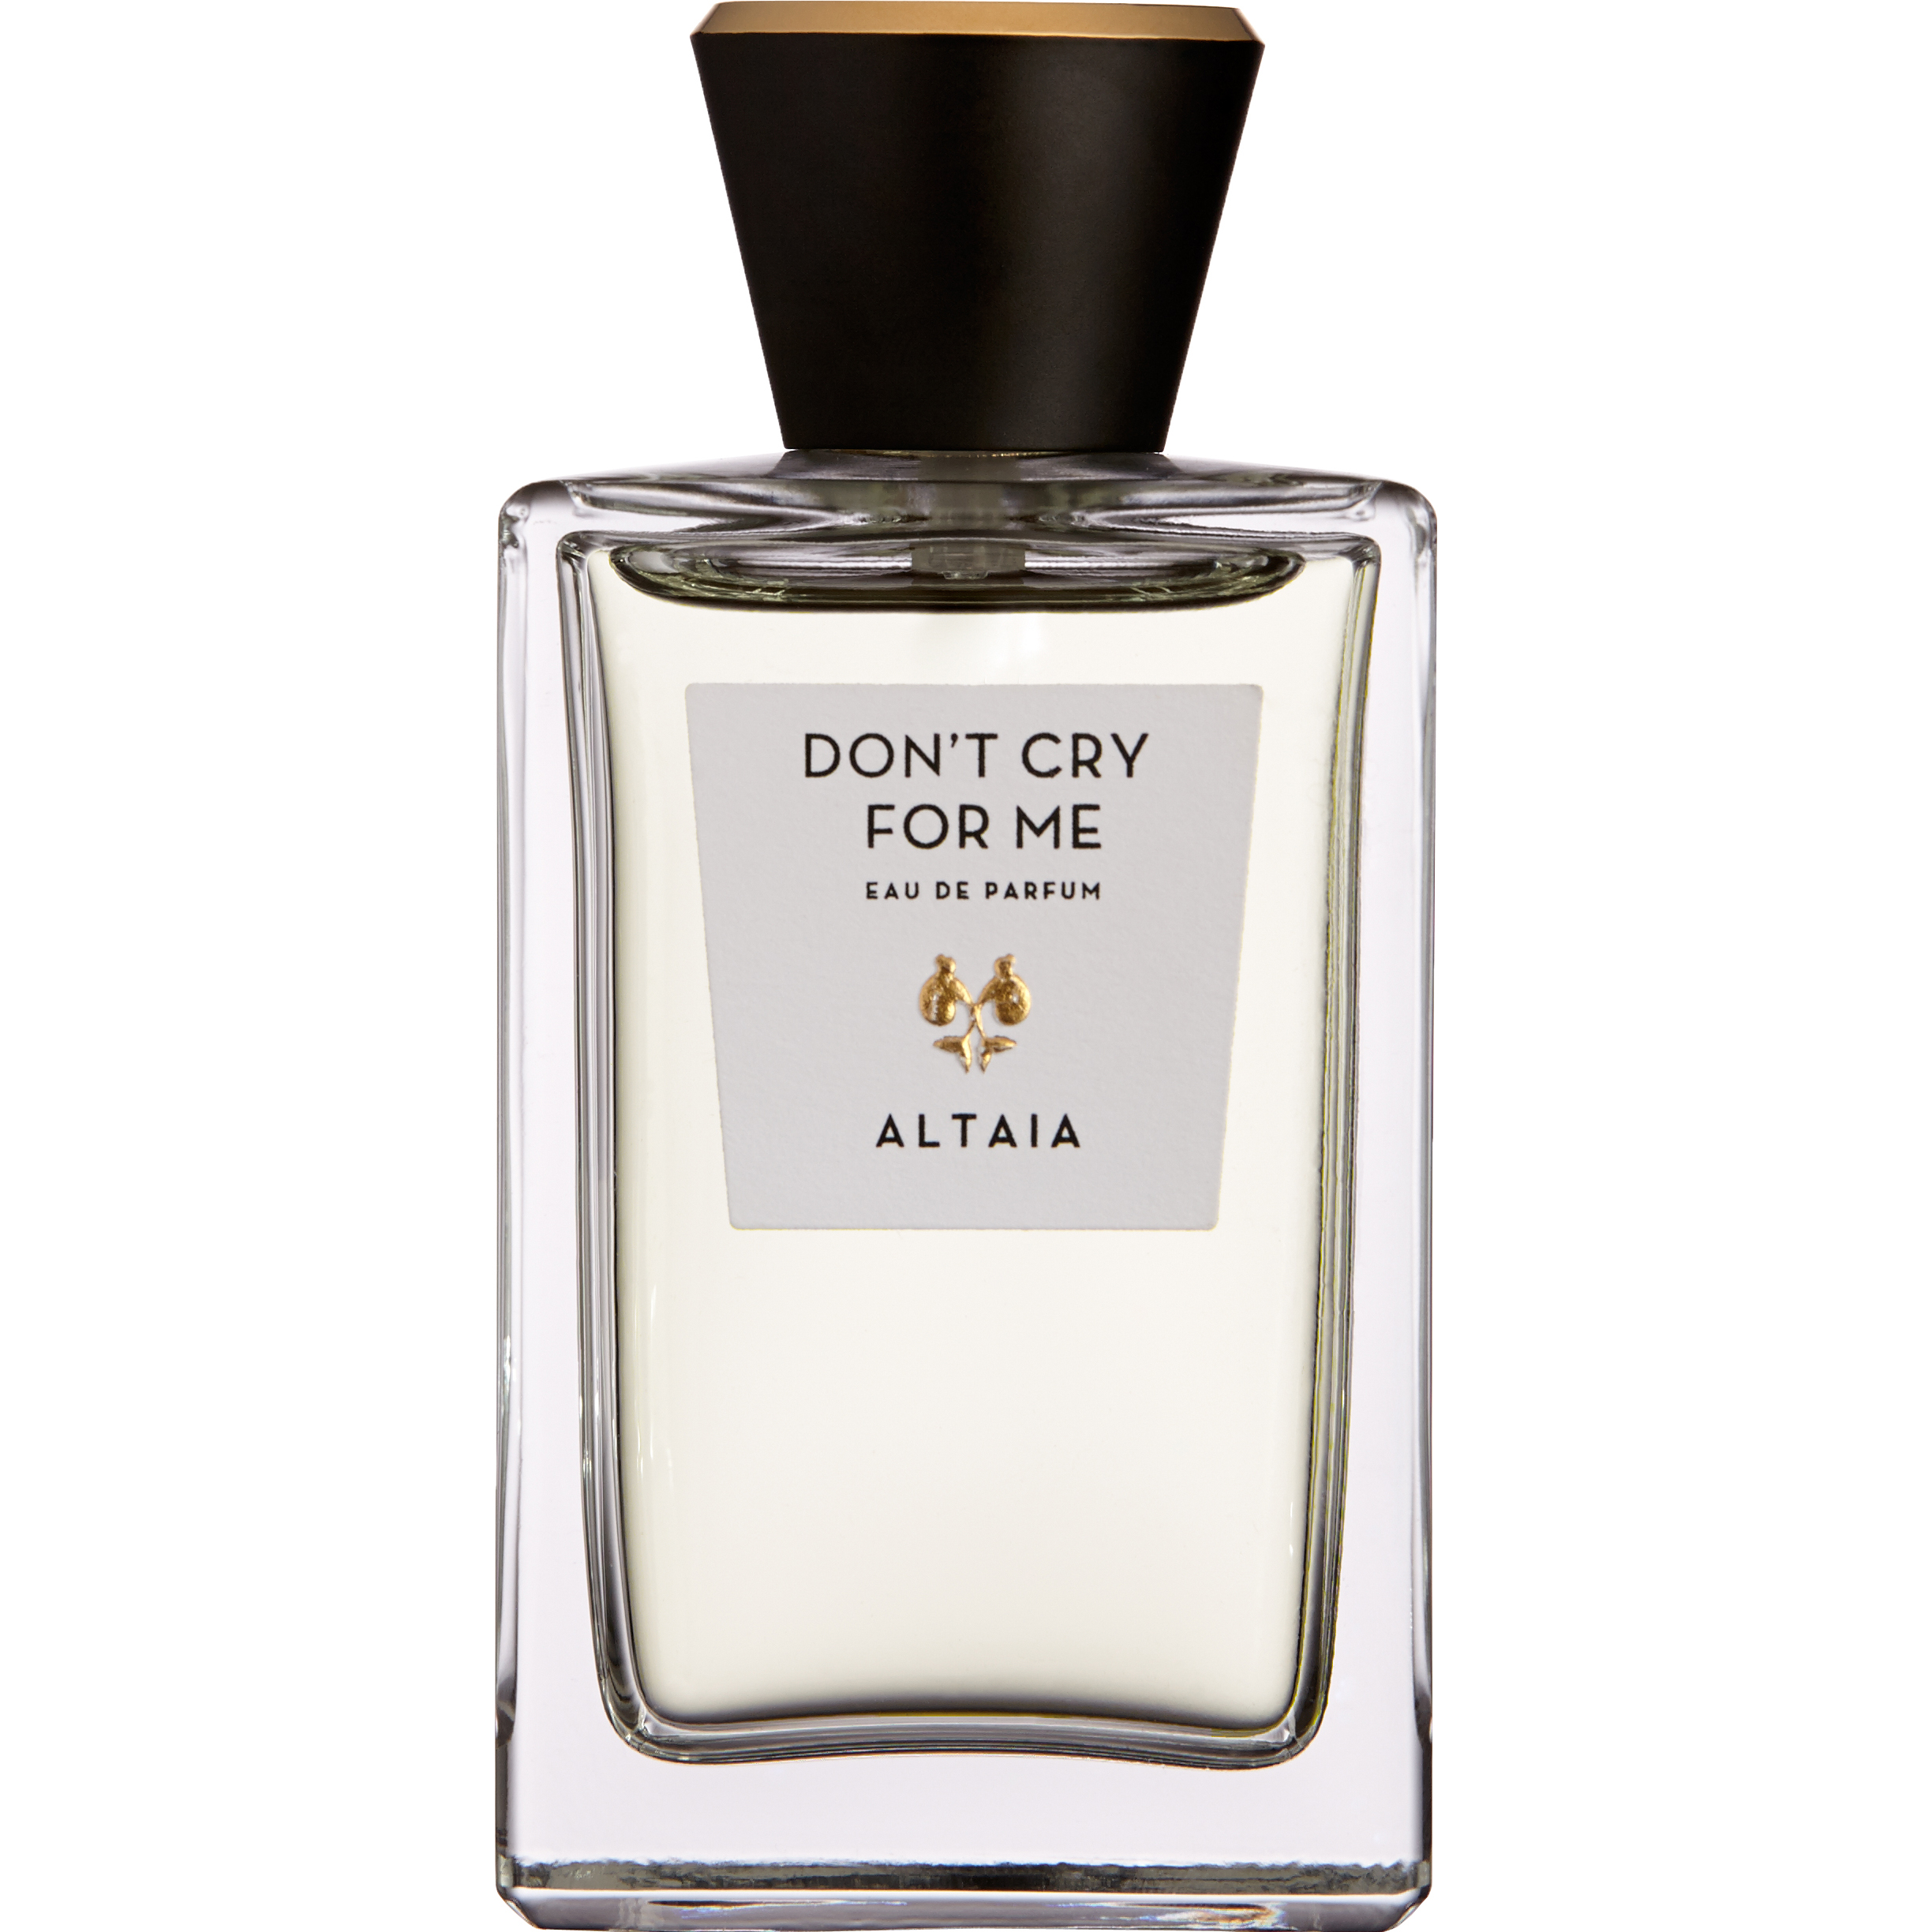 ALTAIA Don't Cry for Me EDP 100 ml - Neos1911